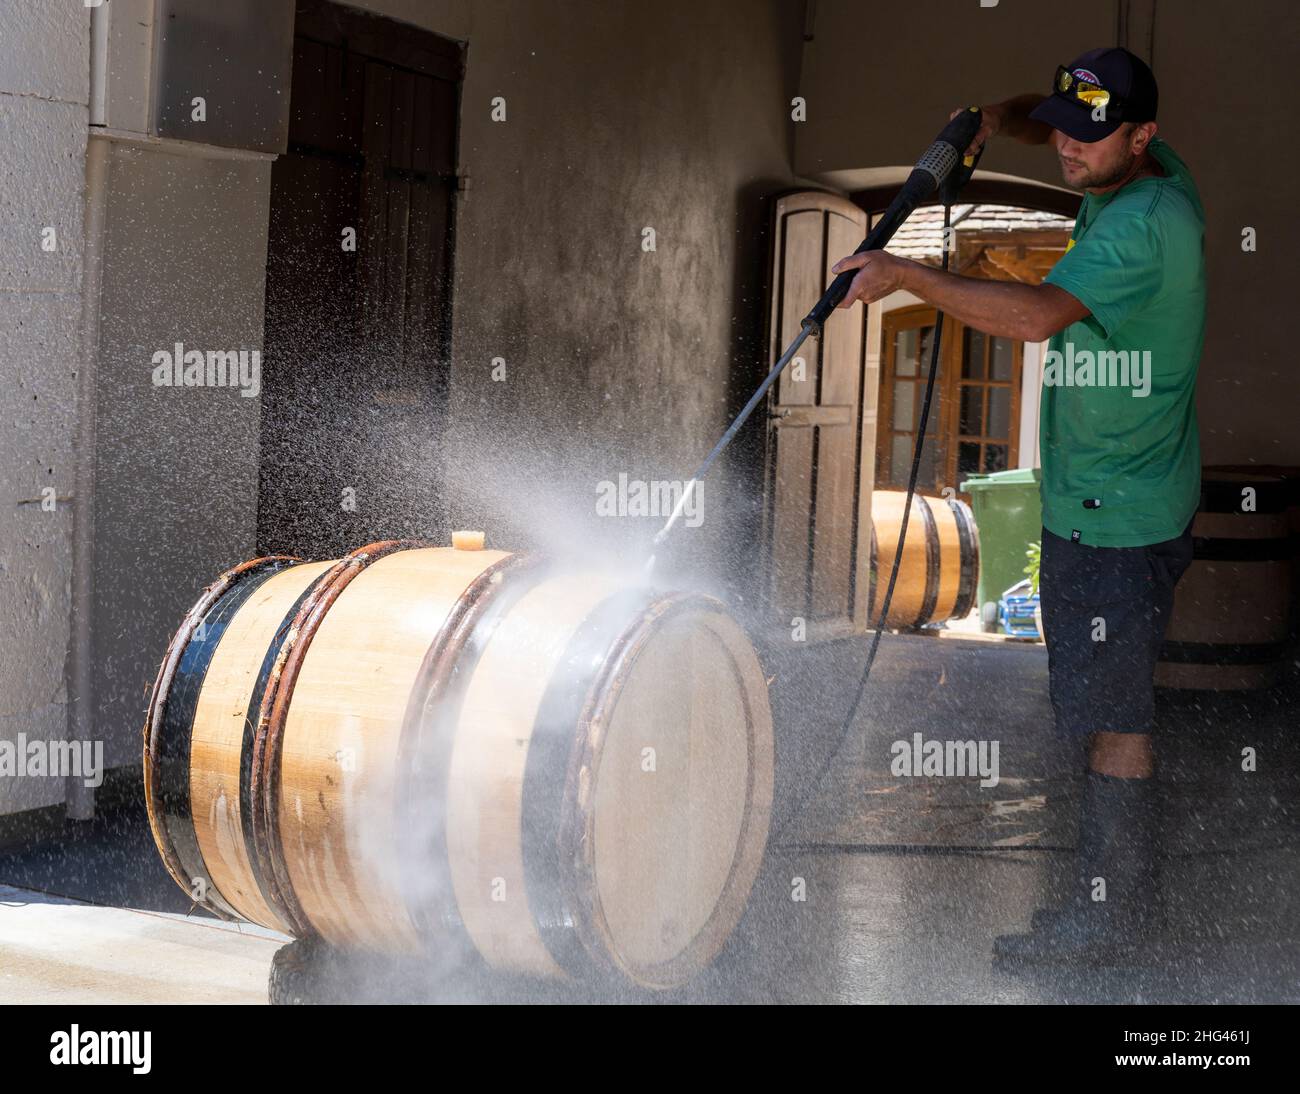 Monthelie, France - June 30, 2020: Cleaning wine barrels on the street in front of the clos in Monthelie in burgundy with pressure washer, France. Stock Photo